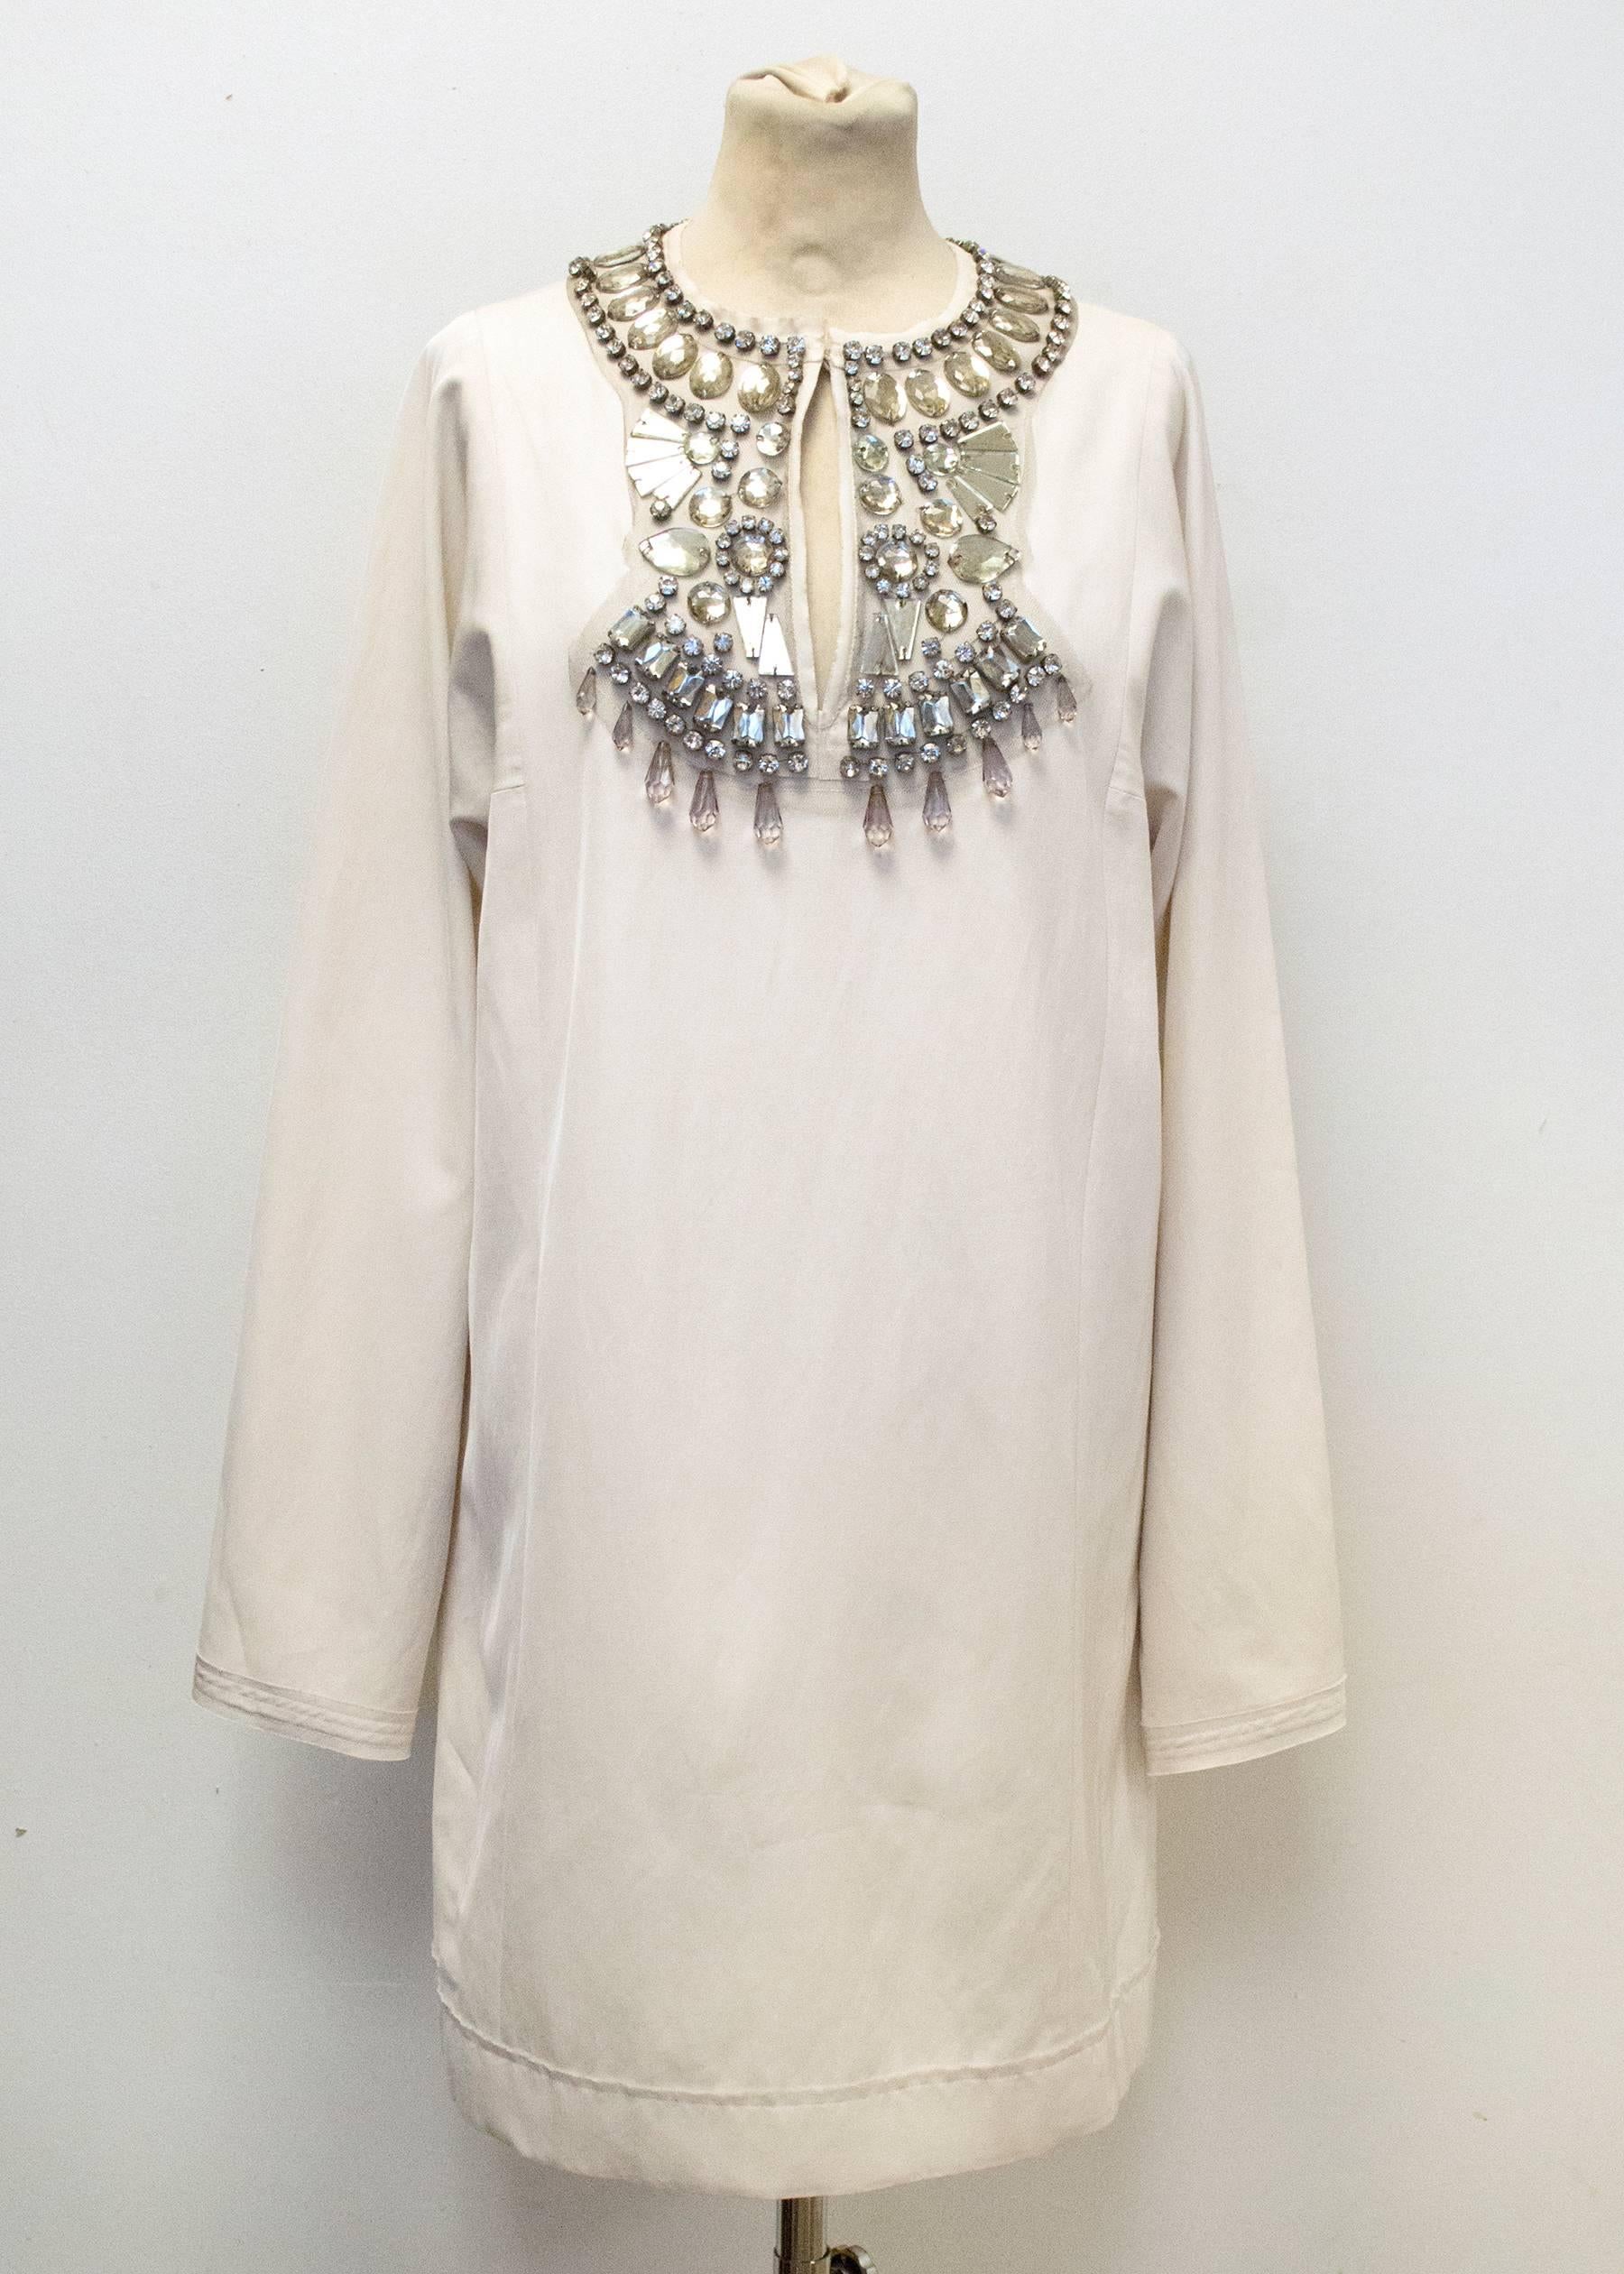 Lanvin cream tunic-style dress, with full length sleeves, and a keyhole neckline with silver metal and jewel embellishments around it. Made in France. Size 38, UK 10, US 6.

Great condition. 9.5/10

Approximate measurements:
Length: 88cm
Sleeves: